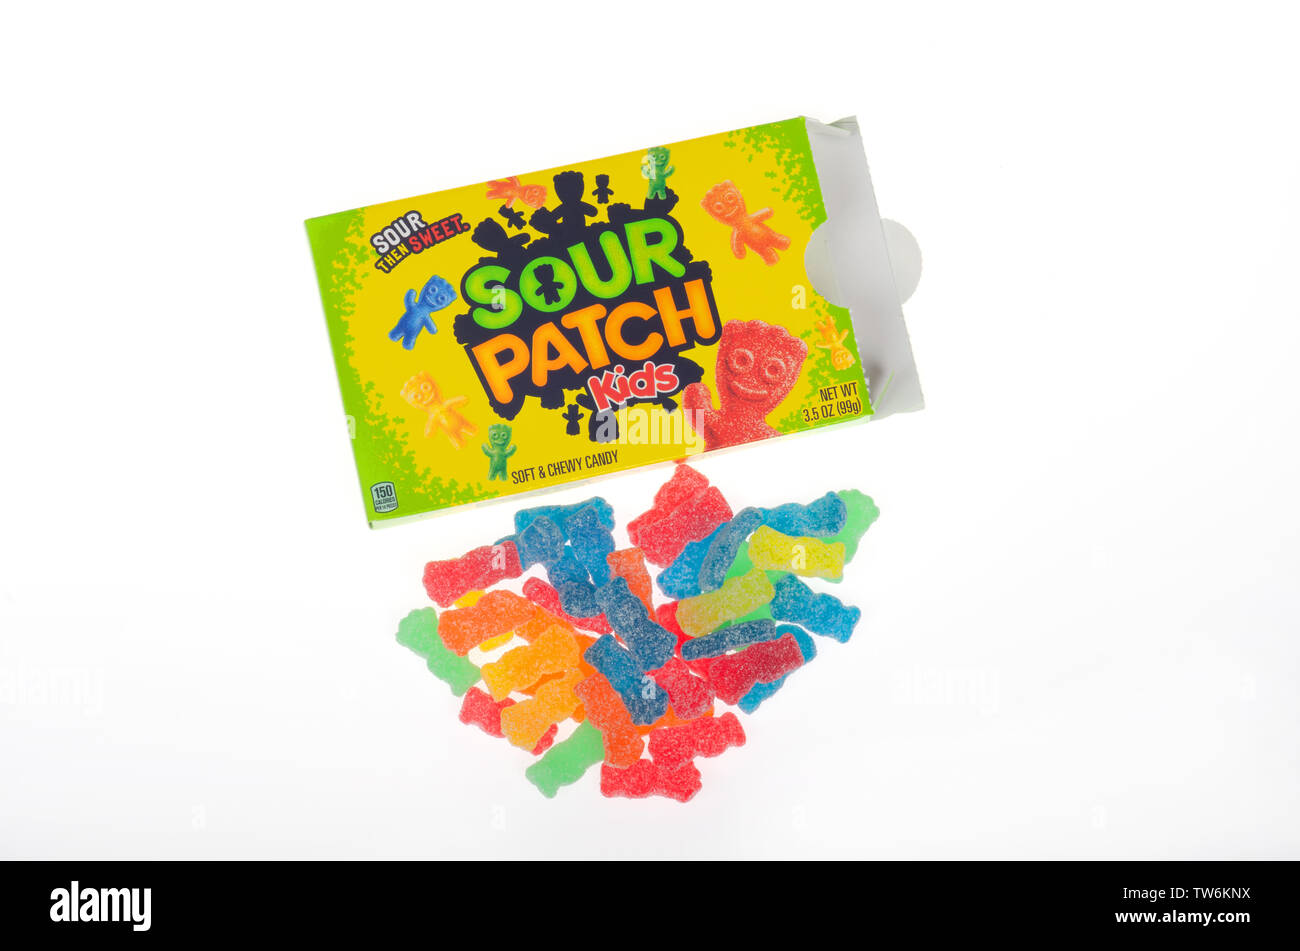 Sour Patch Kids gummies candy or gummy sugary sweets with opened package isolated Stock Photo